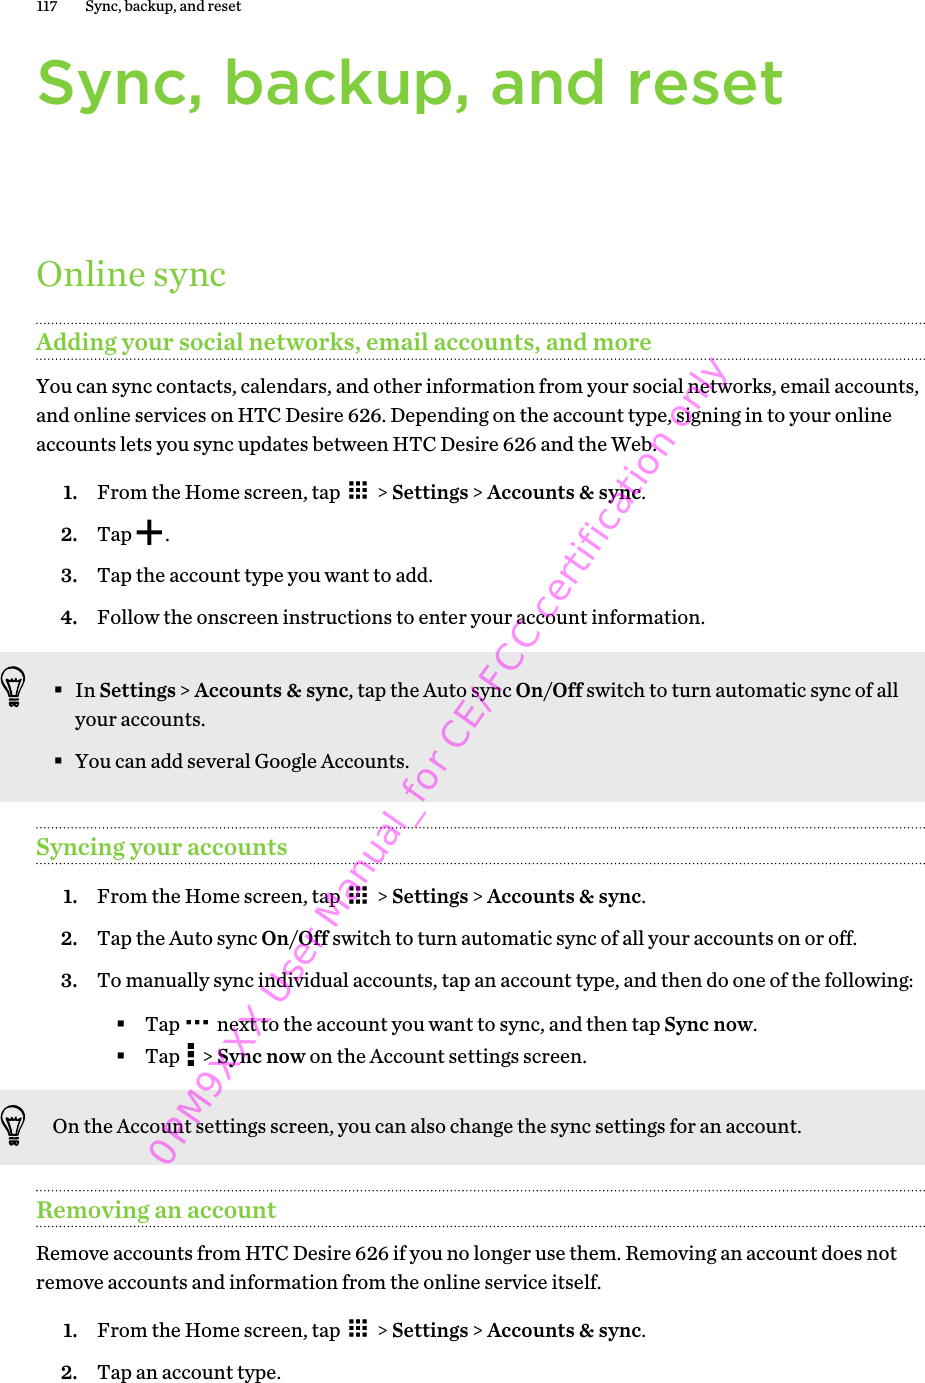 Sync, backup, and resetOnline syncAdding your social networks, email accounts, and moreYou can sync contacts, calendars, and other information from your social networks, email accounts,and online services on HTC Desire 626. Depending on the account type, signing in to your onlineaccounts lets you sync updates between HTC Desire 626 and the Web.1. From the Home screen, tap   &gt; Settings &gt; Accounts &amp; sync.2. Tap  .3. Tap the account type you want to add.4. Follow the onscreen instructions to enter your account information.§In Settings &gt; Accounts &amp; sync, tap the Auto sync On/Off switch to turn automatic sync of allyour accounts.§You can add several Google Accounts.Syncing your accounts1. From the Home screen, tap   &gt; Settings &gt; Accounts &amp; sync.2. Tap the Auto sync On/Off switch to turn automatic sync of all your accounts on or off.3. To manually sync individual accounts, tap an account type, and then do one of the following:§Tap   next to the account you want to sync, and then tap Sync now.§Tap   &gt; Sync now on the Account settings screen.On the Account settings screen, you can also change the sync settings for an account.Removing an accountRemove accounts from HTC Desire 626 if you no longer use them. Removing an account does notremove accounts and information from the online service itself.1. From the Home screen, tap   &gt; Settings &gt; Accounts &amp; sync.2. Tap an account type.117 Sync, backup, and reset0PM9XXX User Manual_for CE/FCC certification only